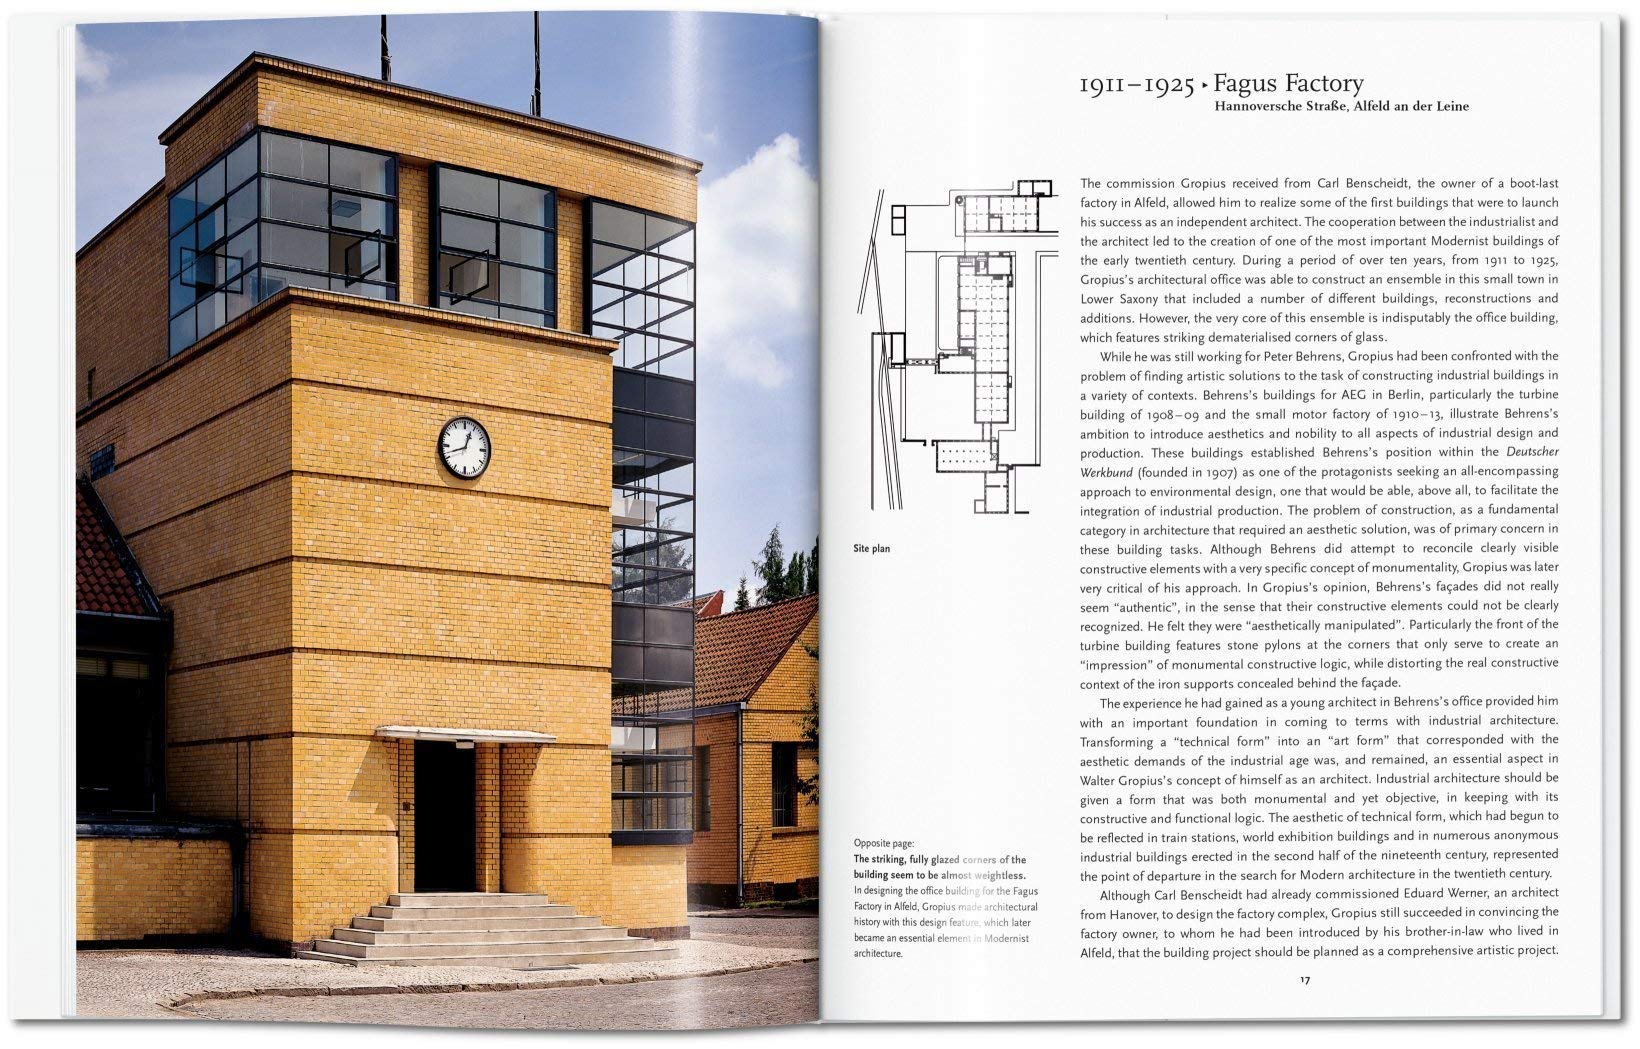 Walter Gropius: 1883-1969: the Promoter of a New Form